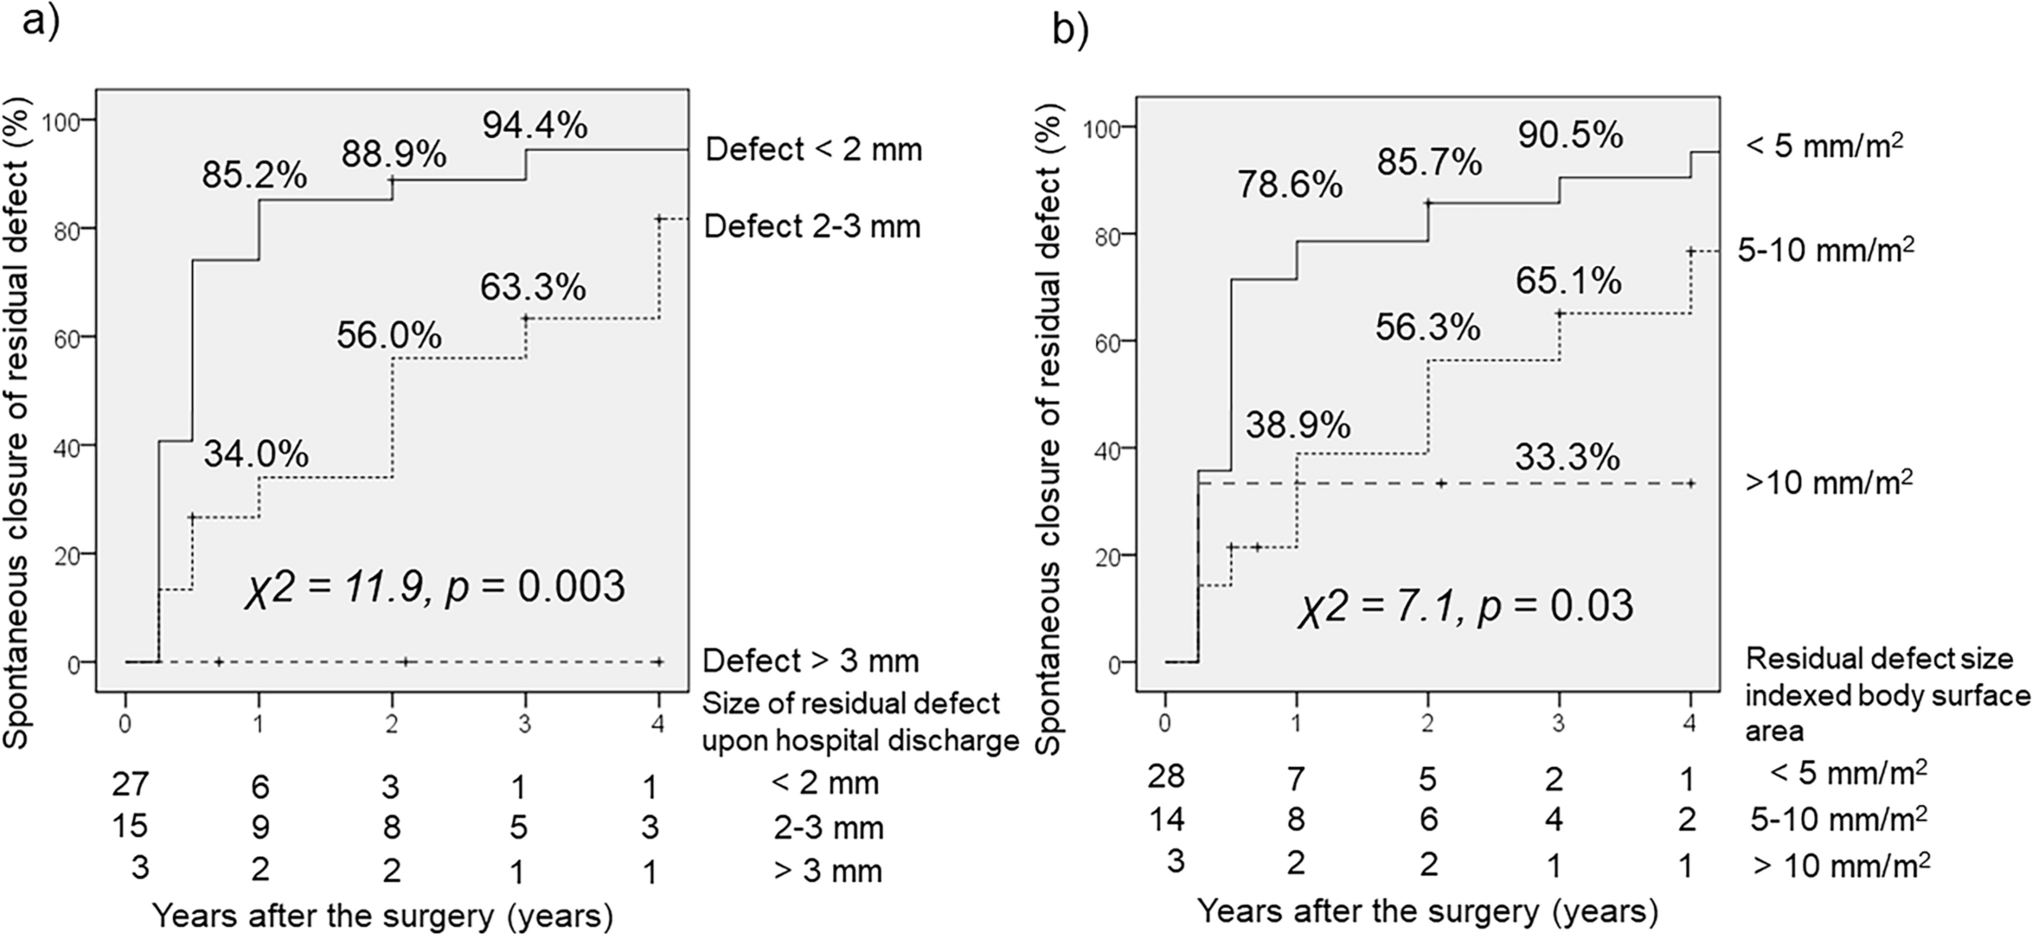 Clinical Course of Residual Ventricular Septal Defects After Congenital Heart Disease Repair